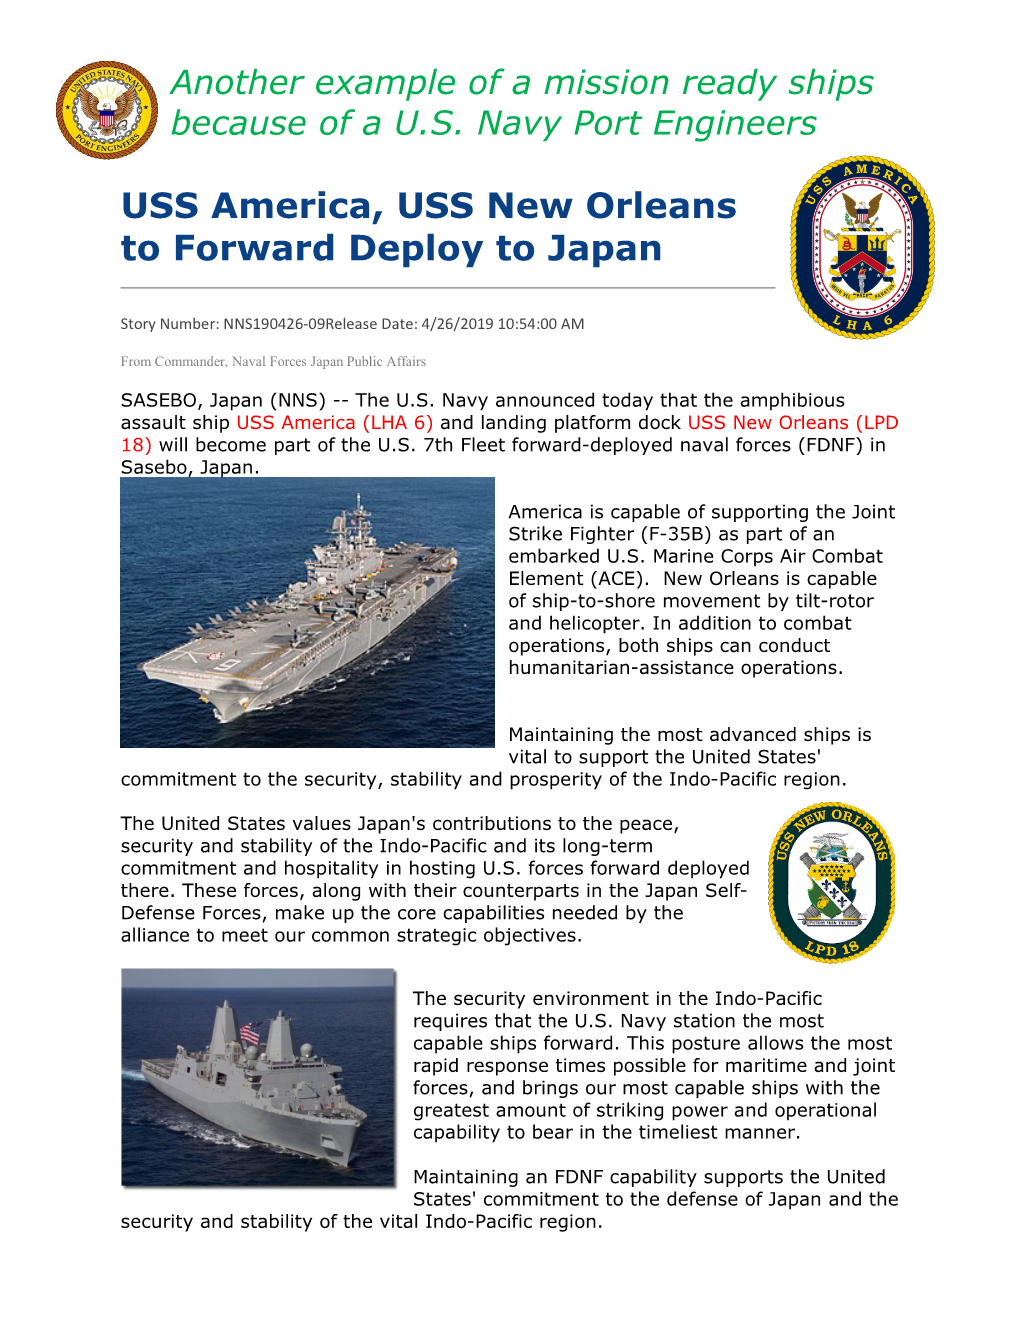 USS America, USS New Orleans to Forward Deploy to Japan